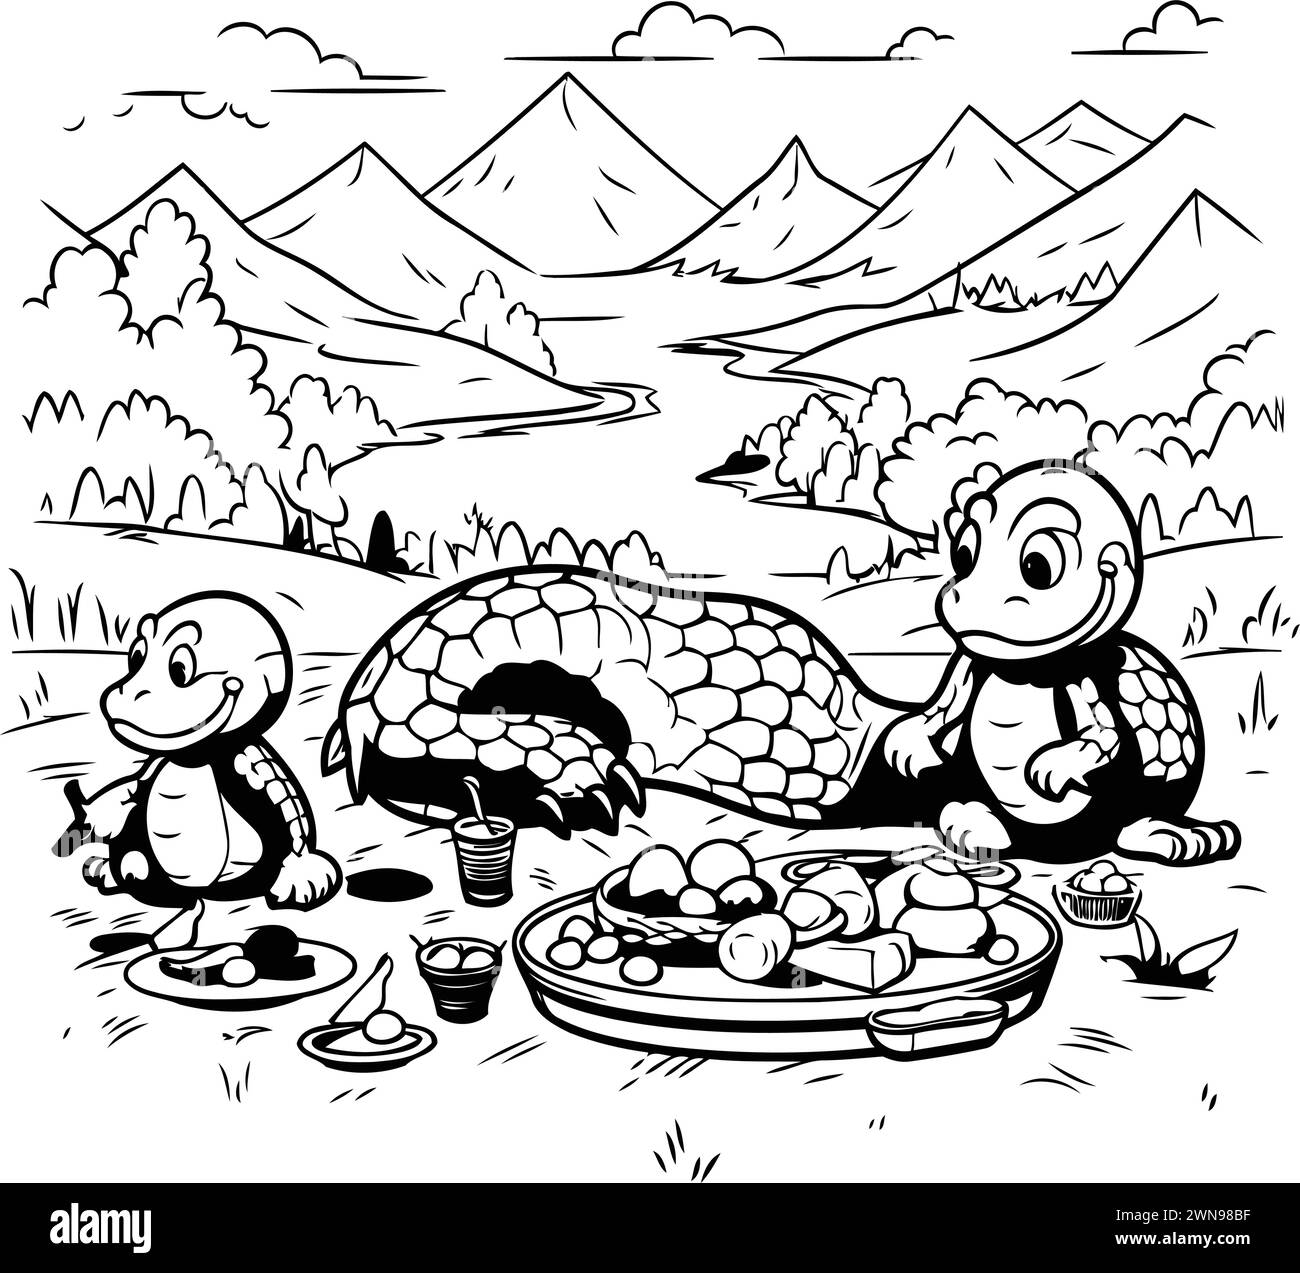 Turtle eating food. Black and white vector illustration for coloring book Stock Vector